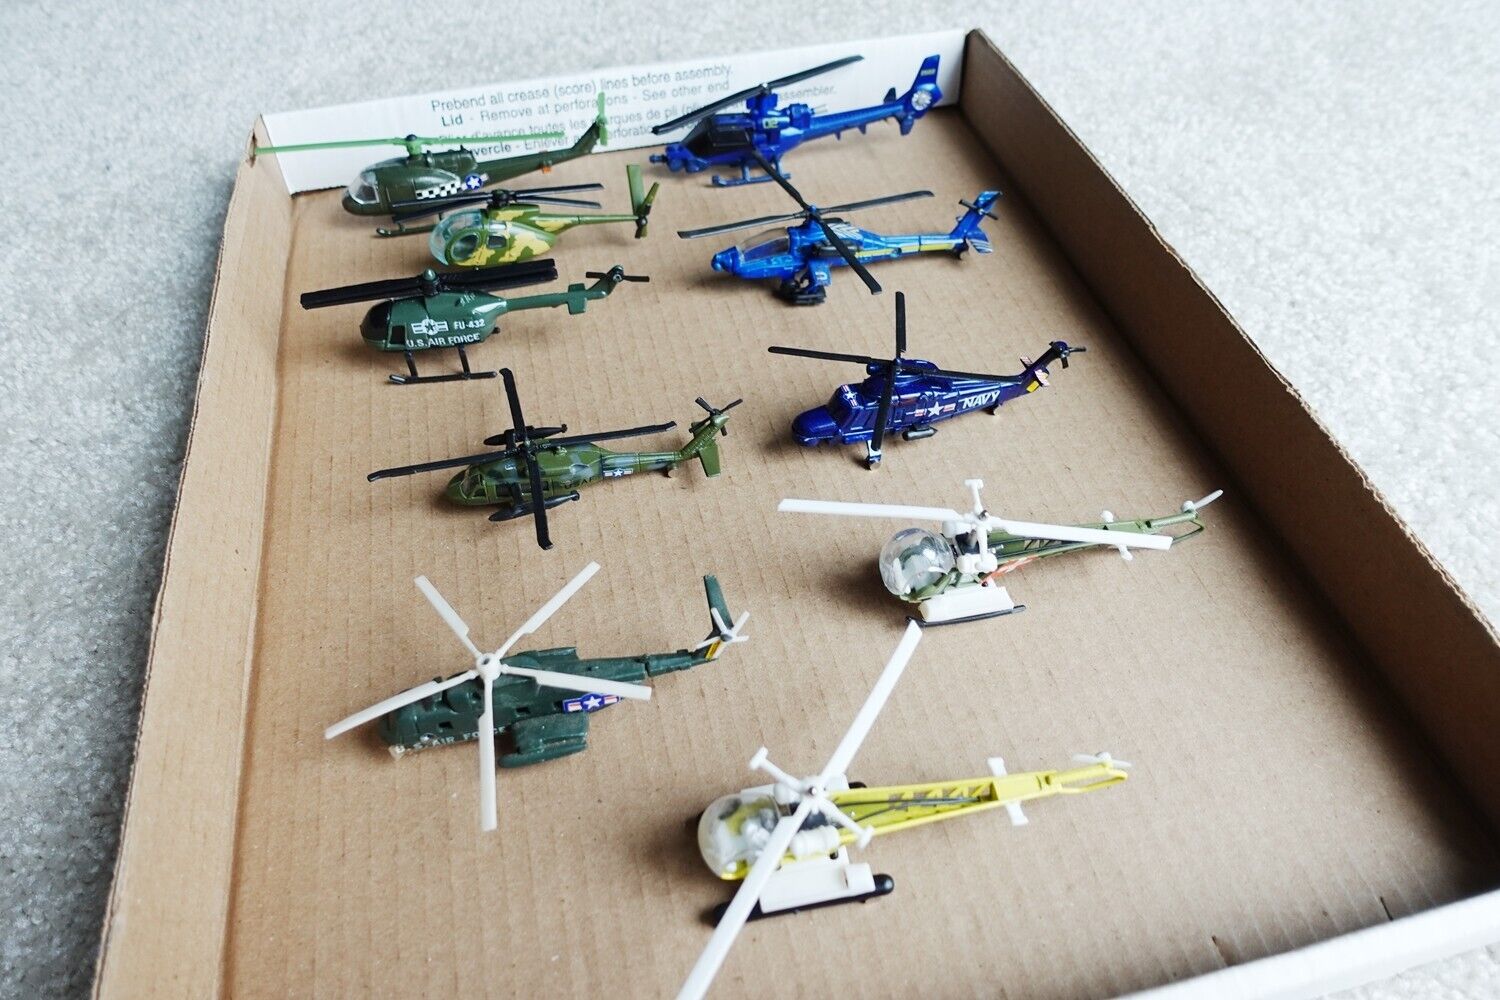 Lot of 10 Vintage Military Helicopters (Zee Toy, Etc) loose